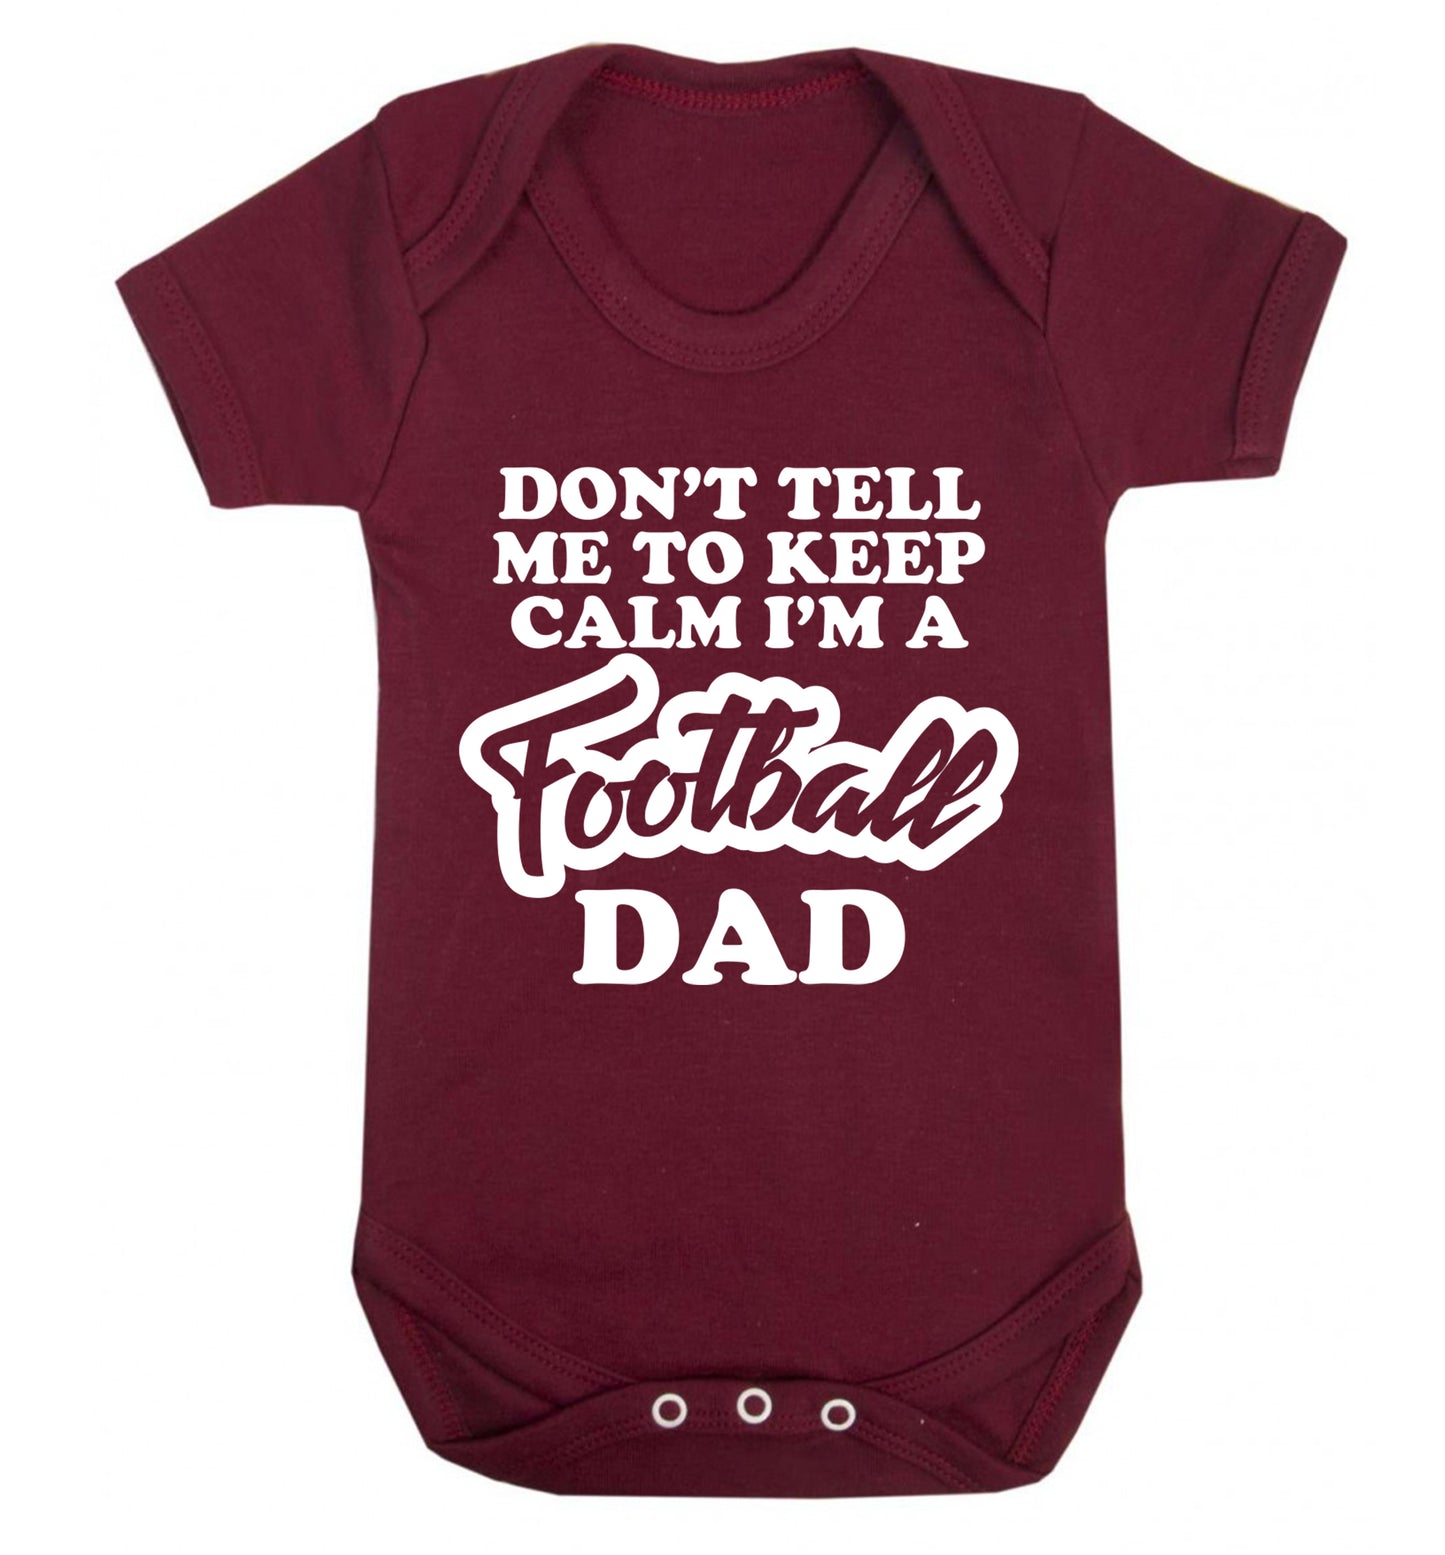 Don't tell me to keep calm I'm a football grandad Baby Vest maroon 18-24 months